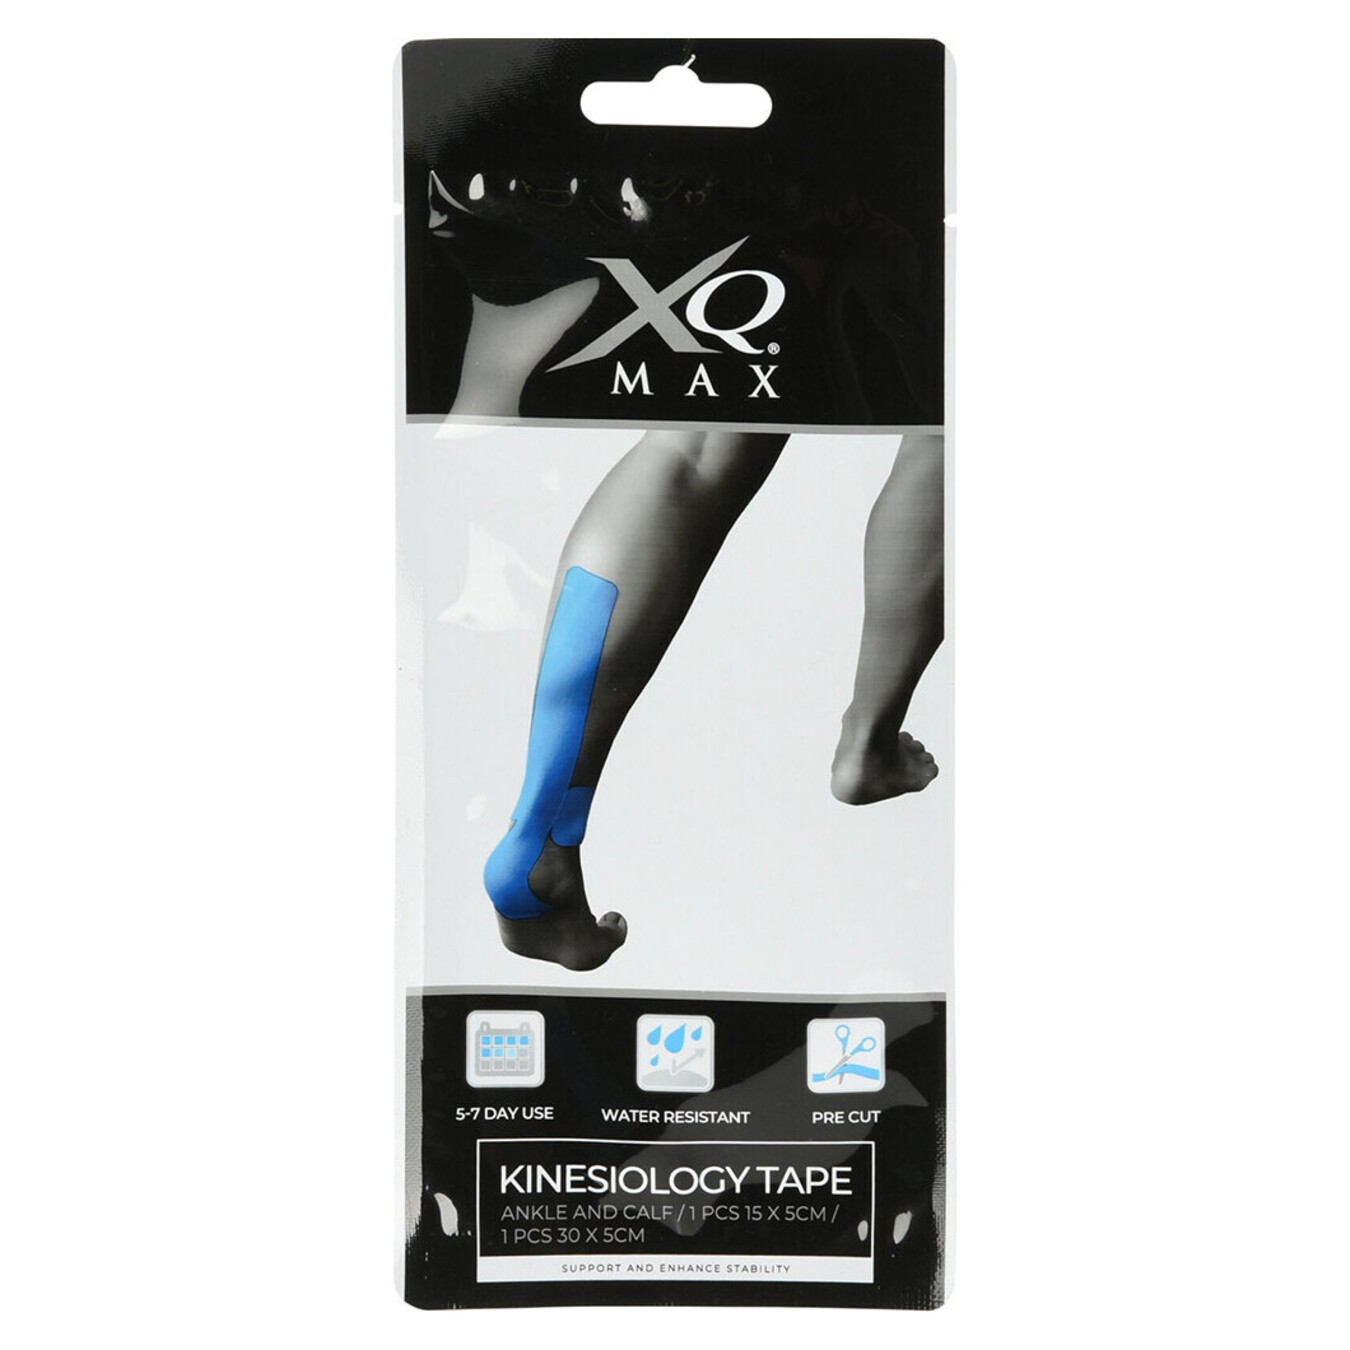 A set of Koopman kinesiology tapes for the calf and ankle, 2 pcs